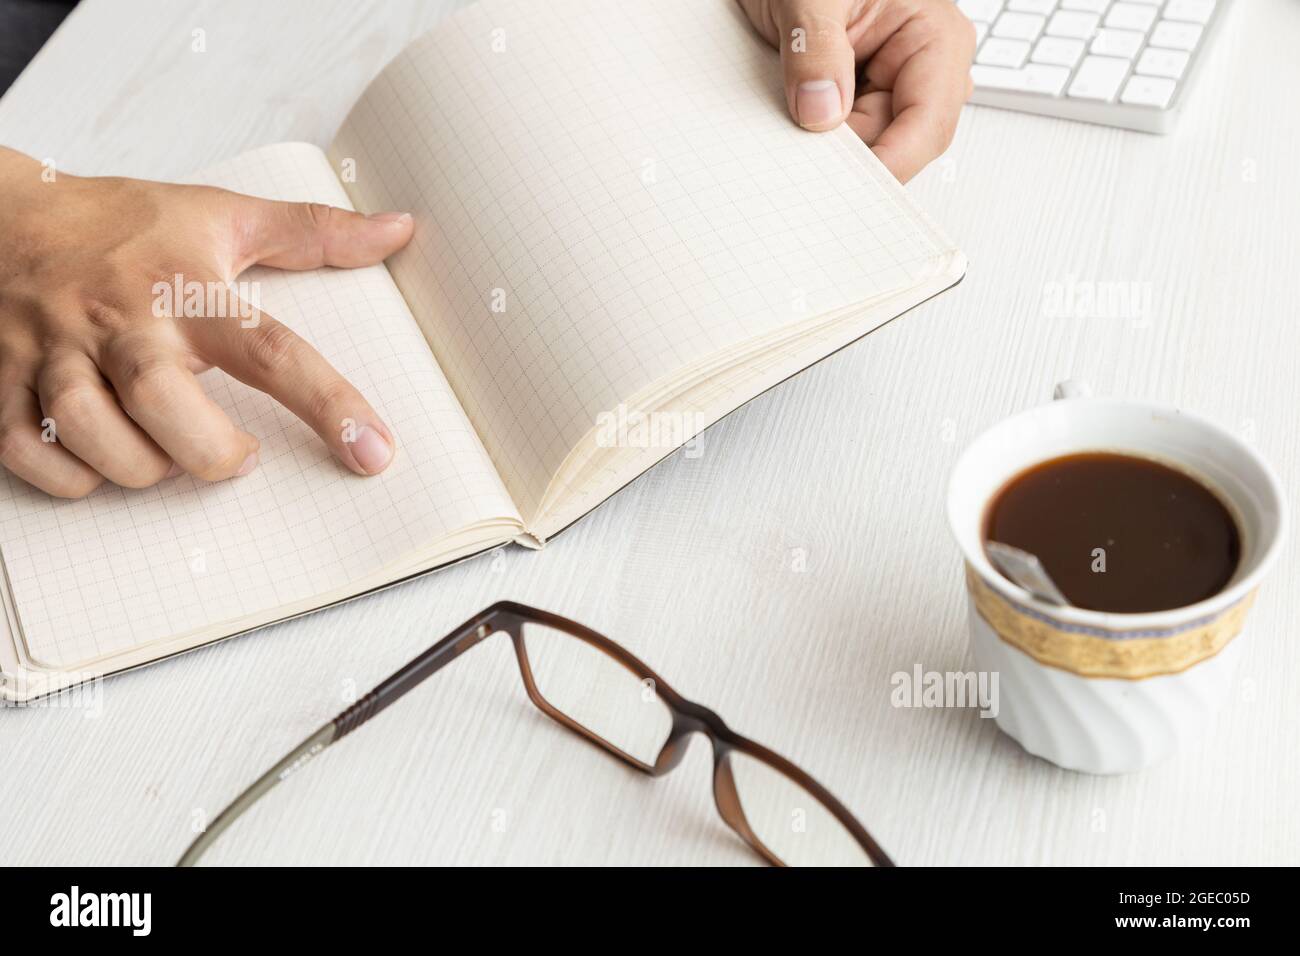 studio with the details of a desk with a person's hands holding and pointing with a notebook with open blank sheets and modern eyeglasses, workplace Stock Photo